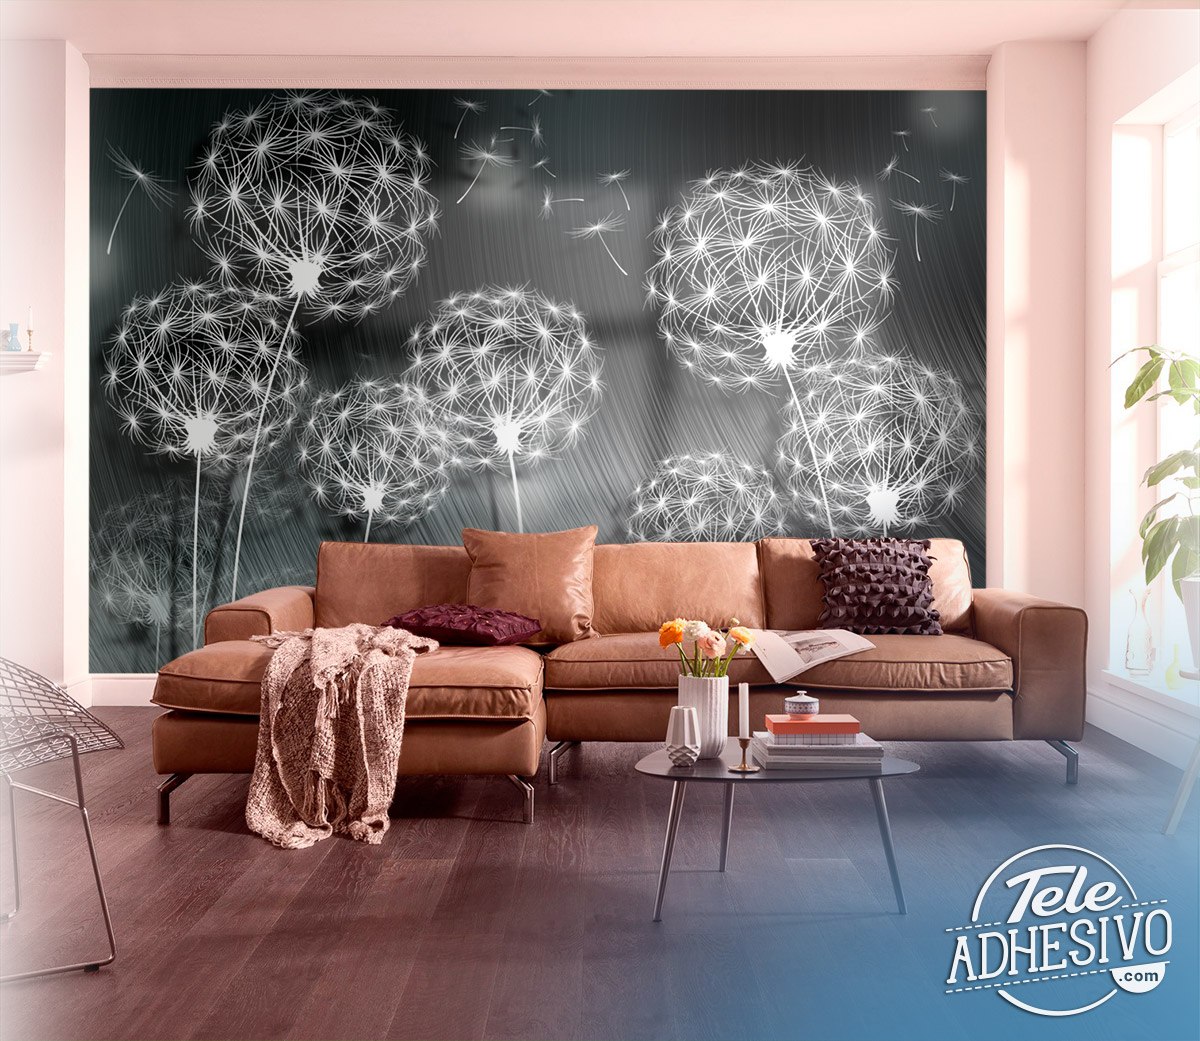 Wall Murals: Dandelions in Black and White